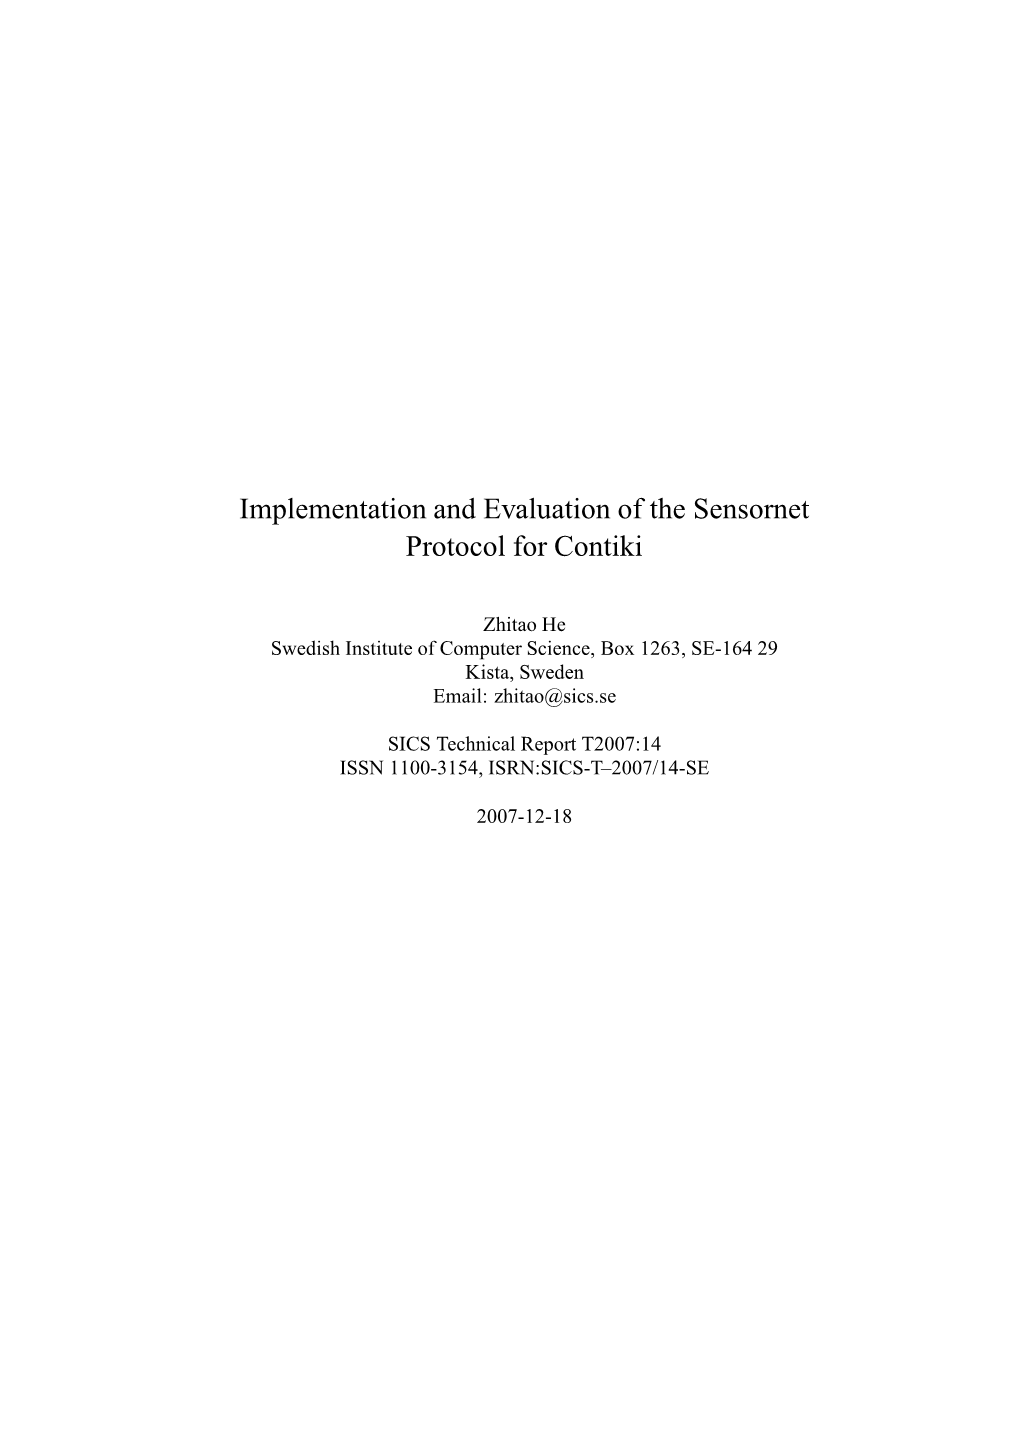 Implementation and Evaluation of the Sensornet Protocol for Contiki